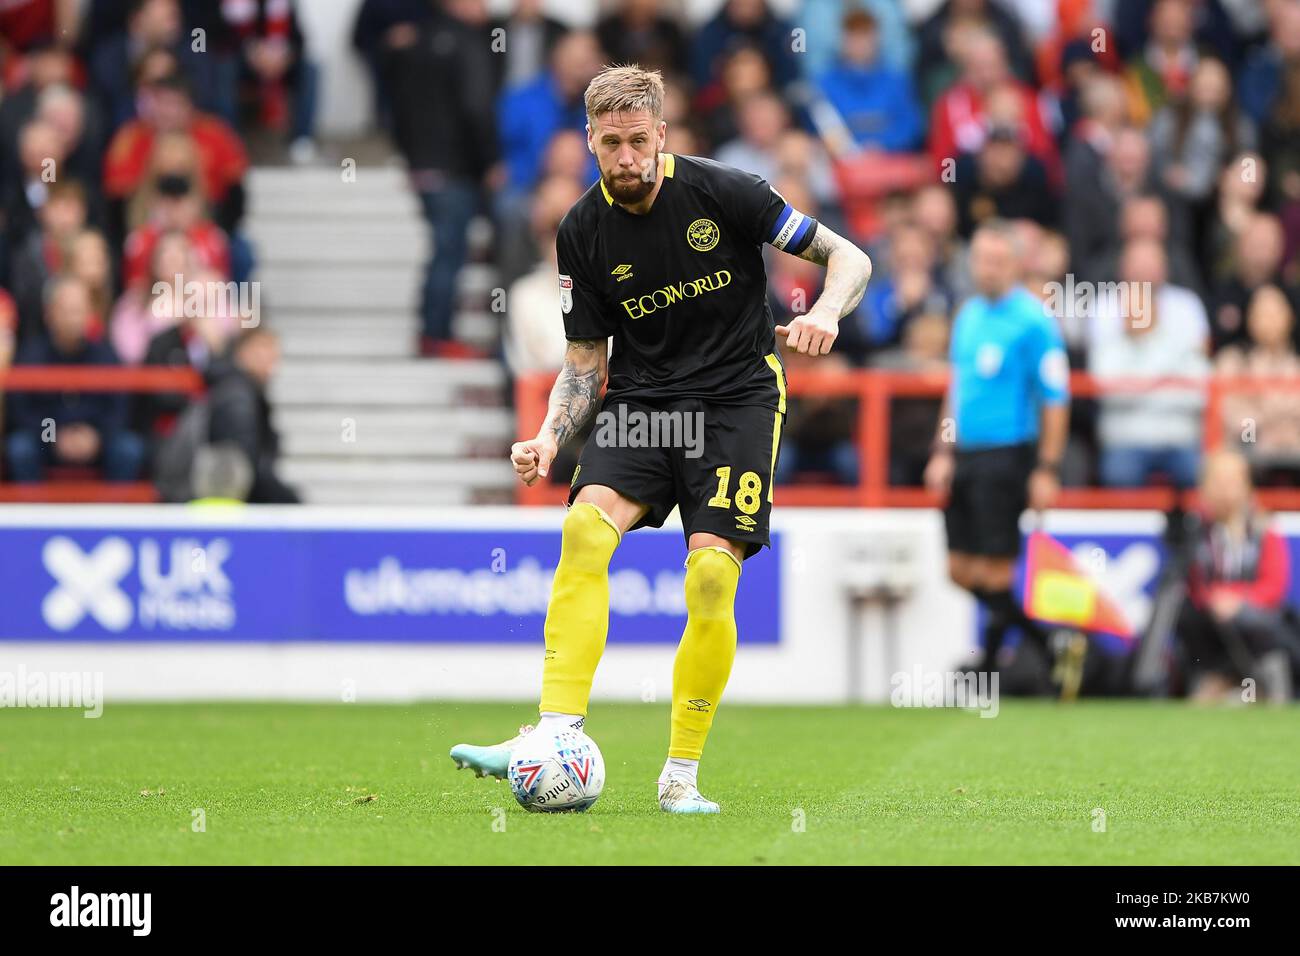 Pontus Jansson (18) of Brentford during the Sky Bet Championship match between Nottingham Forest and Brentford at the City Ground, Nottingham on Saturday 5th October 2019. (Photo by Jon Hobley/MI News/NurPhoto) Stock Photo